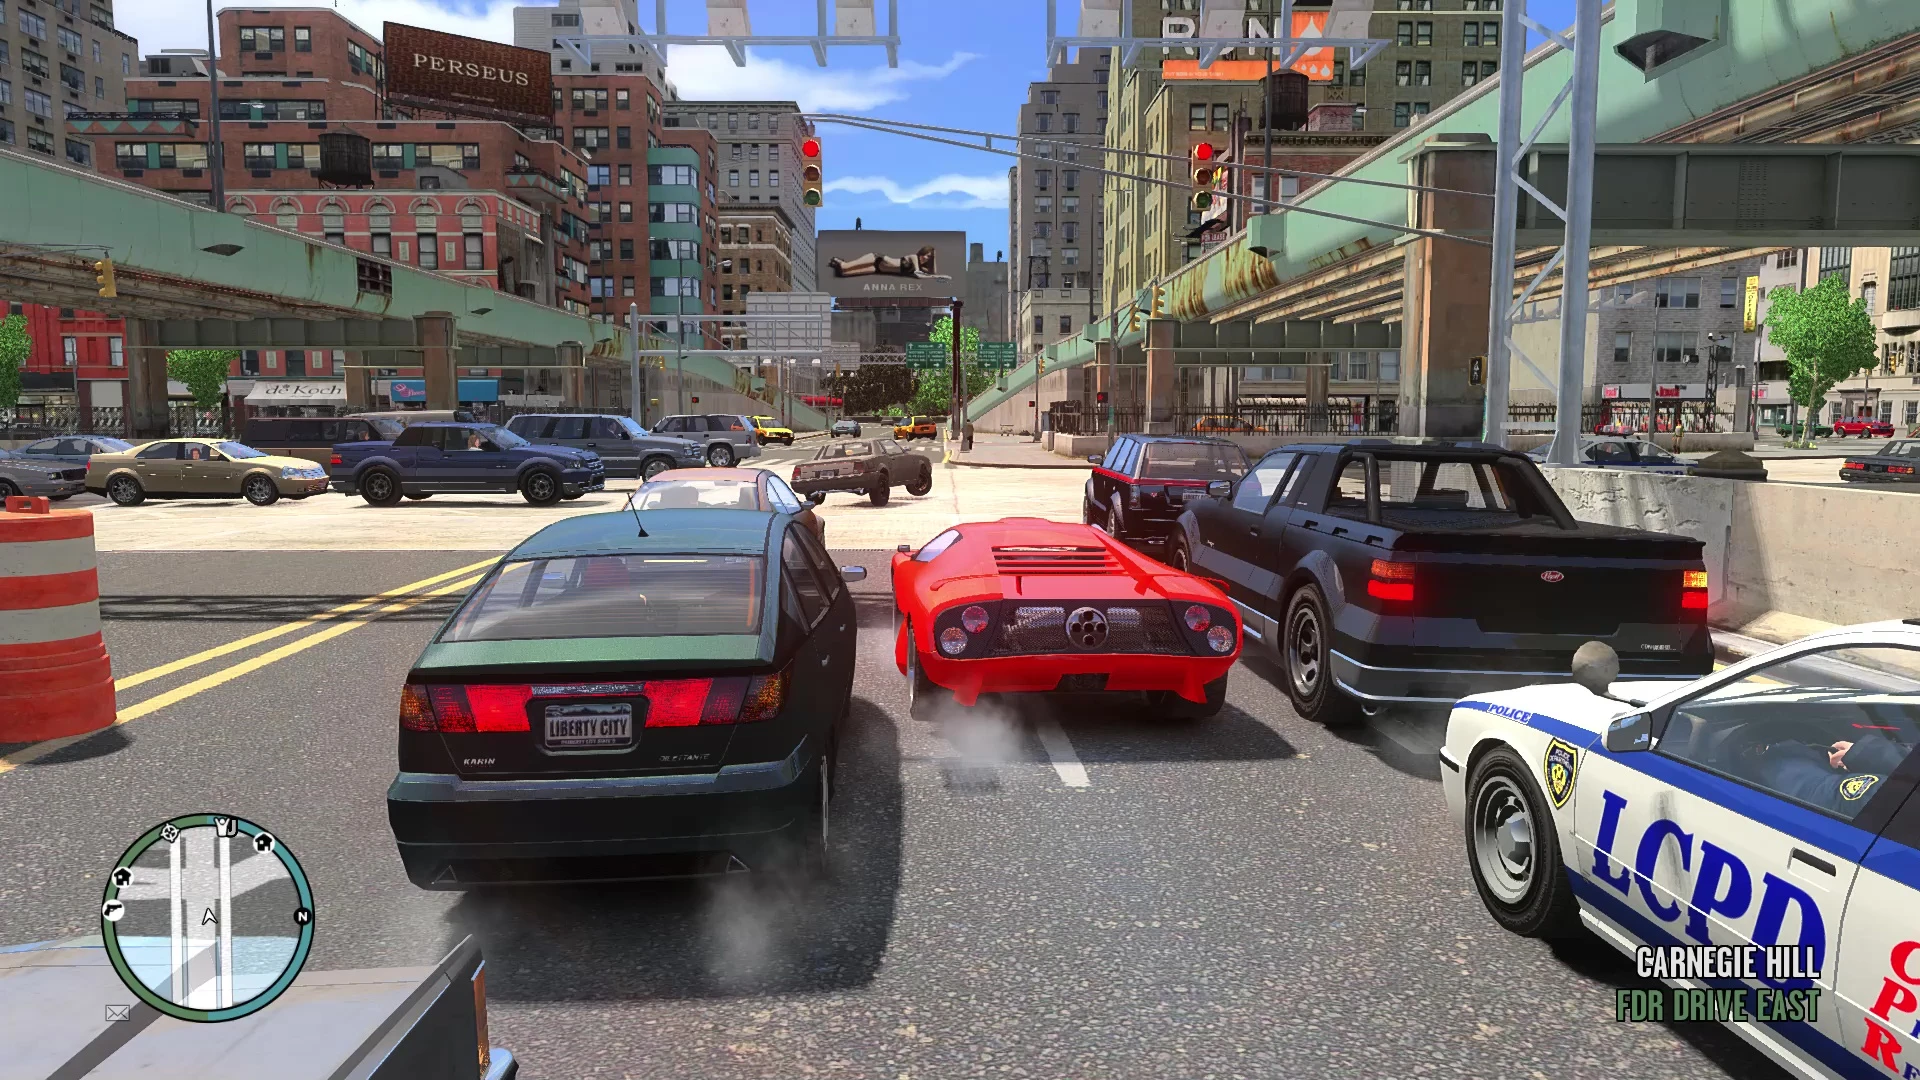 GTA IV Mods with Excellent ENB Graphics v 4 Mod at Grand Theft